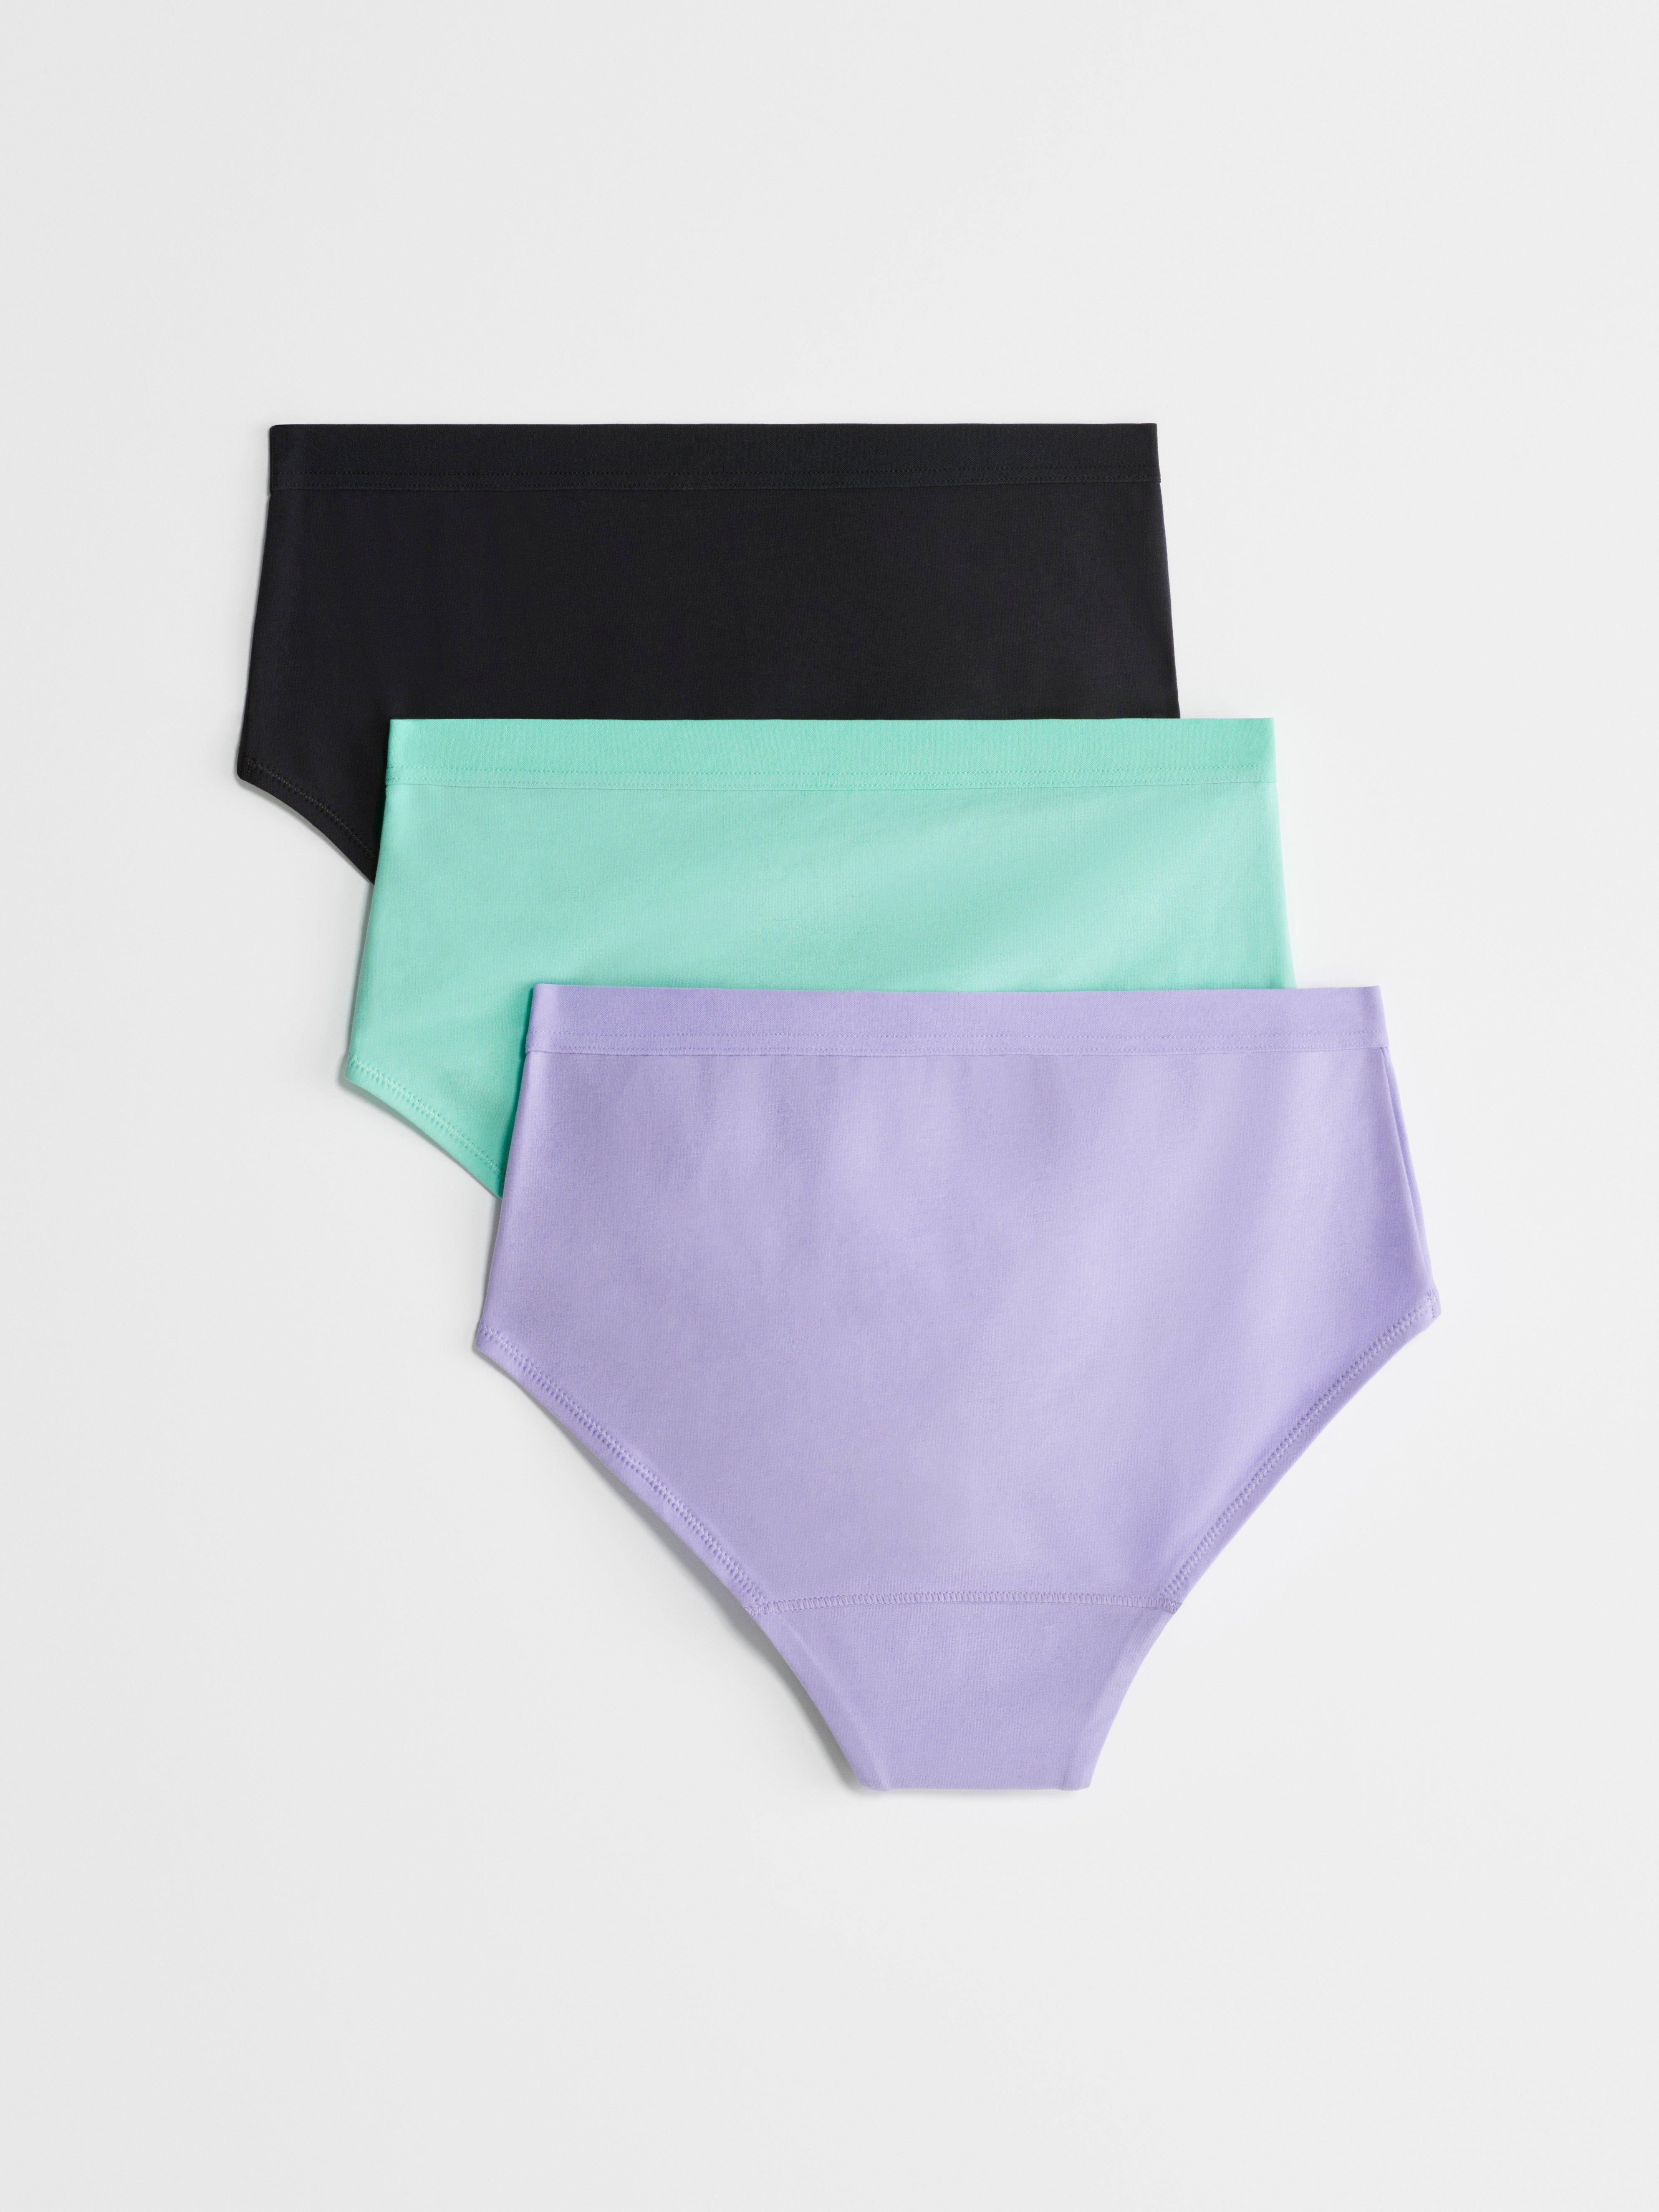 Period-proof panty guide